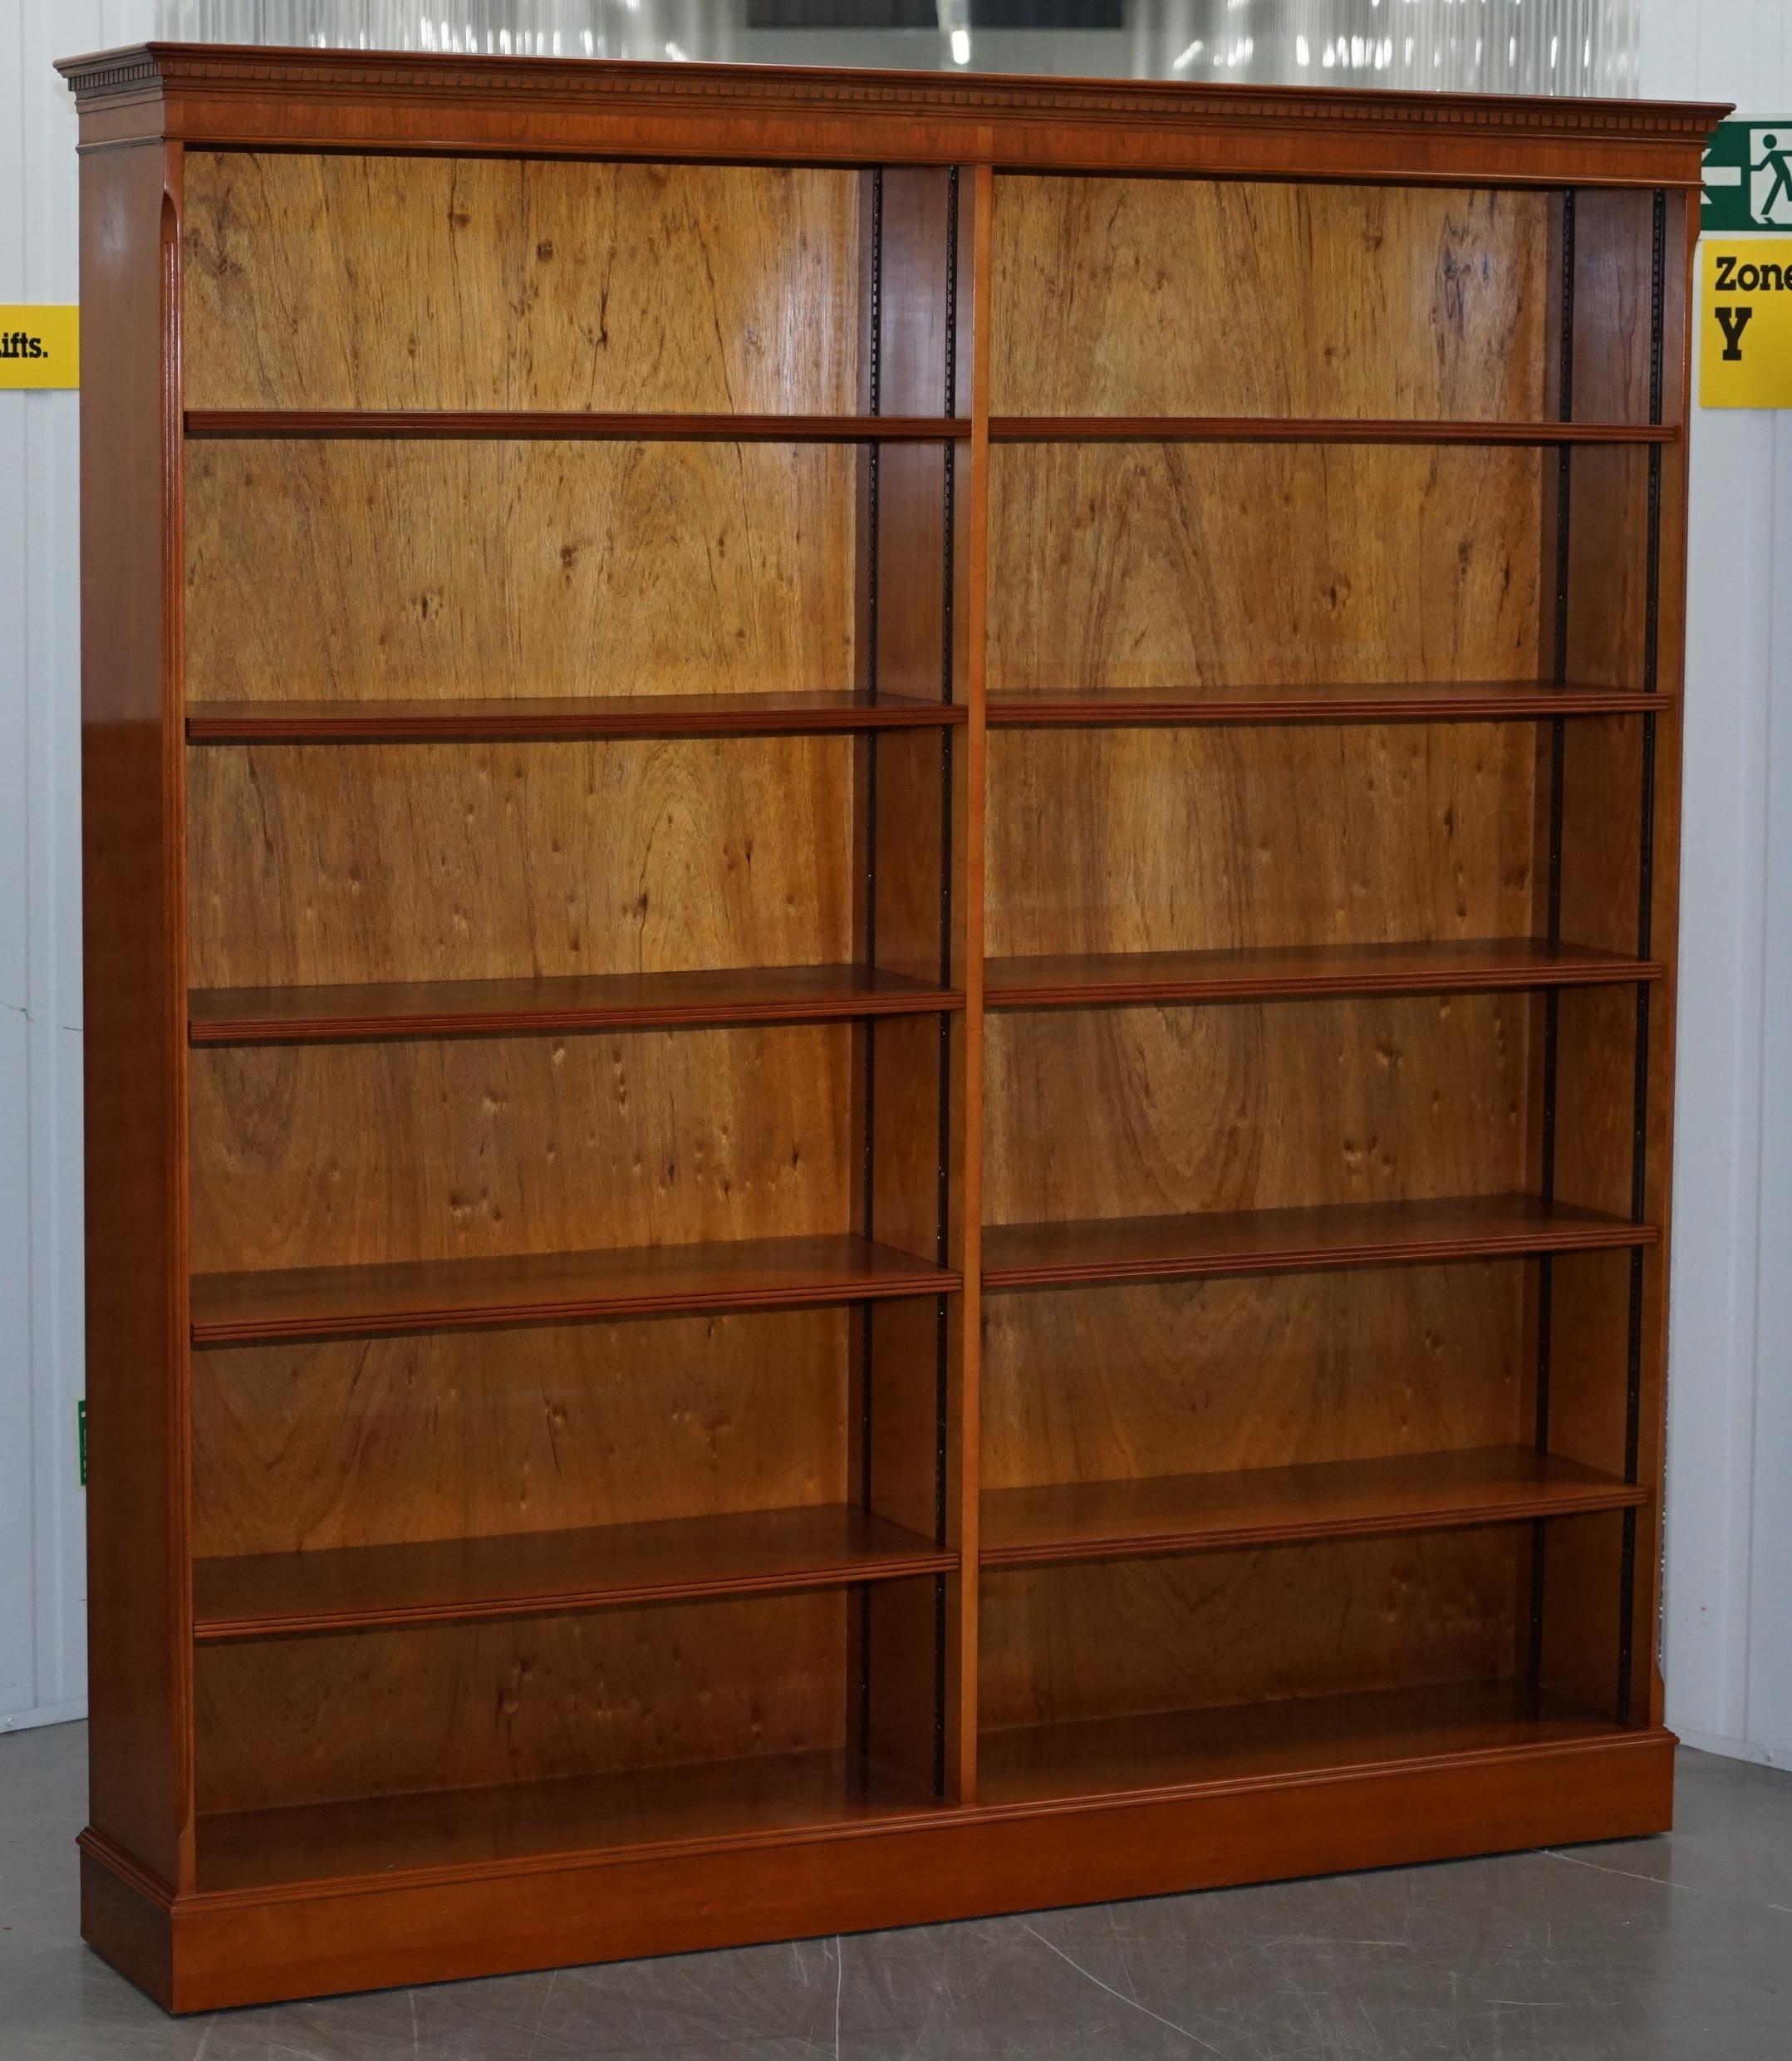 Wimbledon-Furniture

Wimbledon-Furniture is delighted to offer for sale this stunning pair of solid heavy cherrywood double twin bank Library bookcases

Please note the delivery fee listed is just a guide, it covers within the M25 only, for an